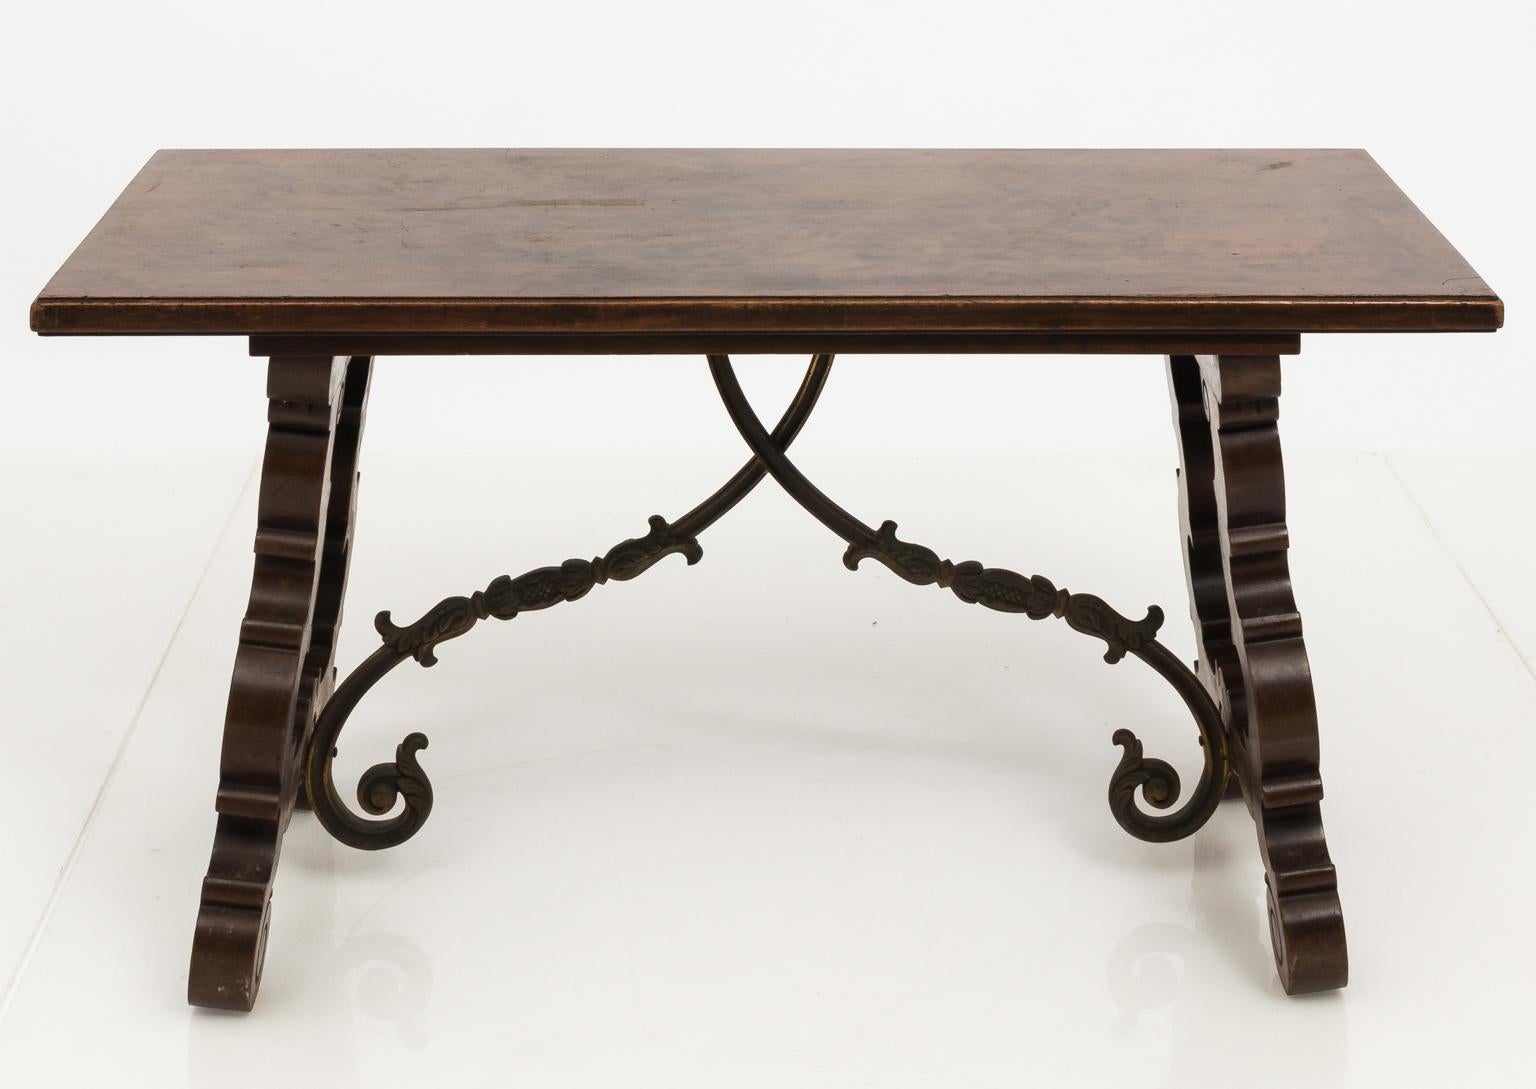 Italian Renaissance style walnut trestle coffee table with heavily carved scroll legs and a center scrolled cross stretcher in brass, circa 1950s.